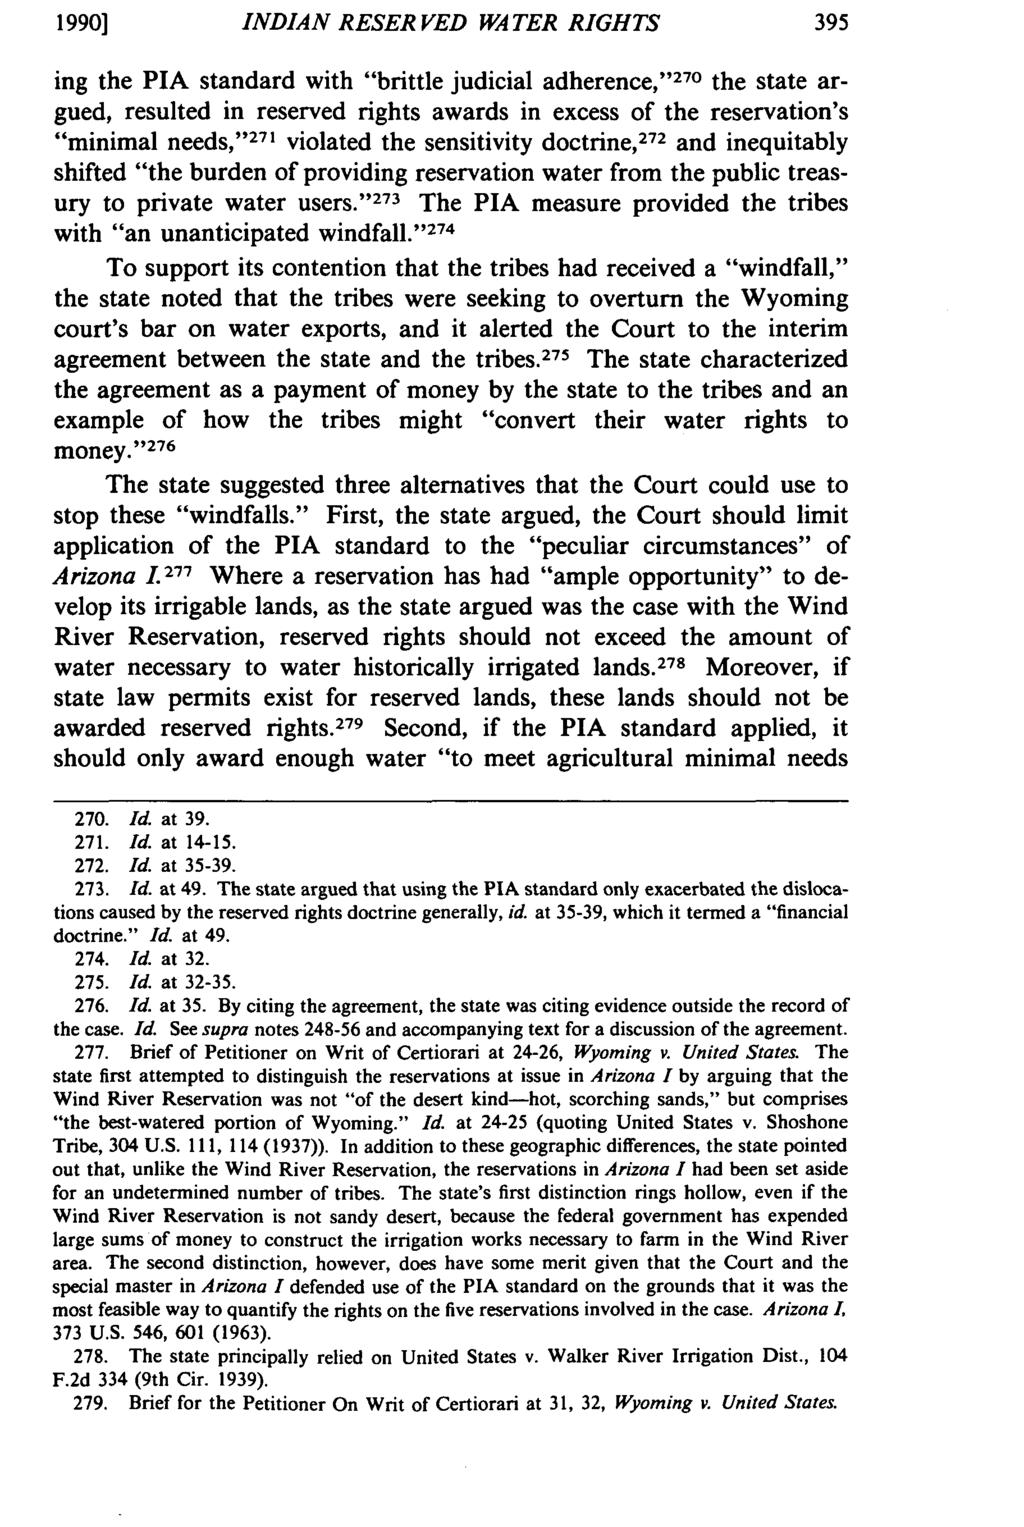 1990] INDIAN RESERVED WATER RIGHTS ing the PIA standard with "brittle judicial adherence, ' 270 the state argued, resulted in reserved rights awards in excess of the reservation's "minimal needs," '